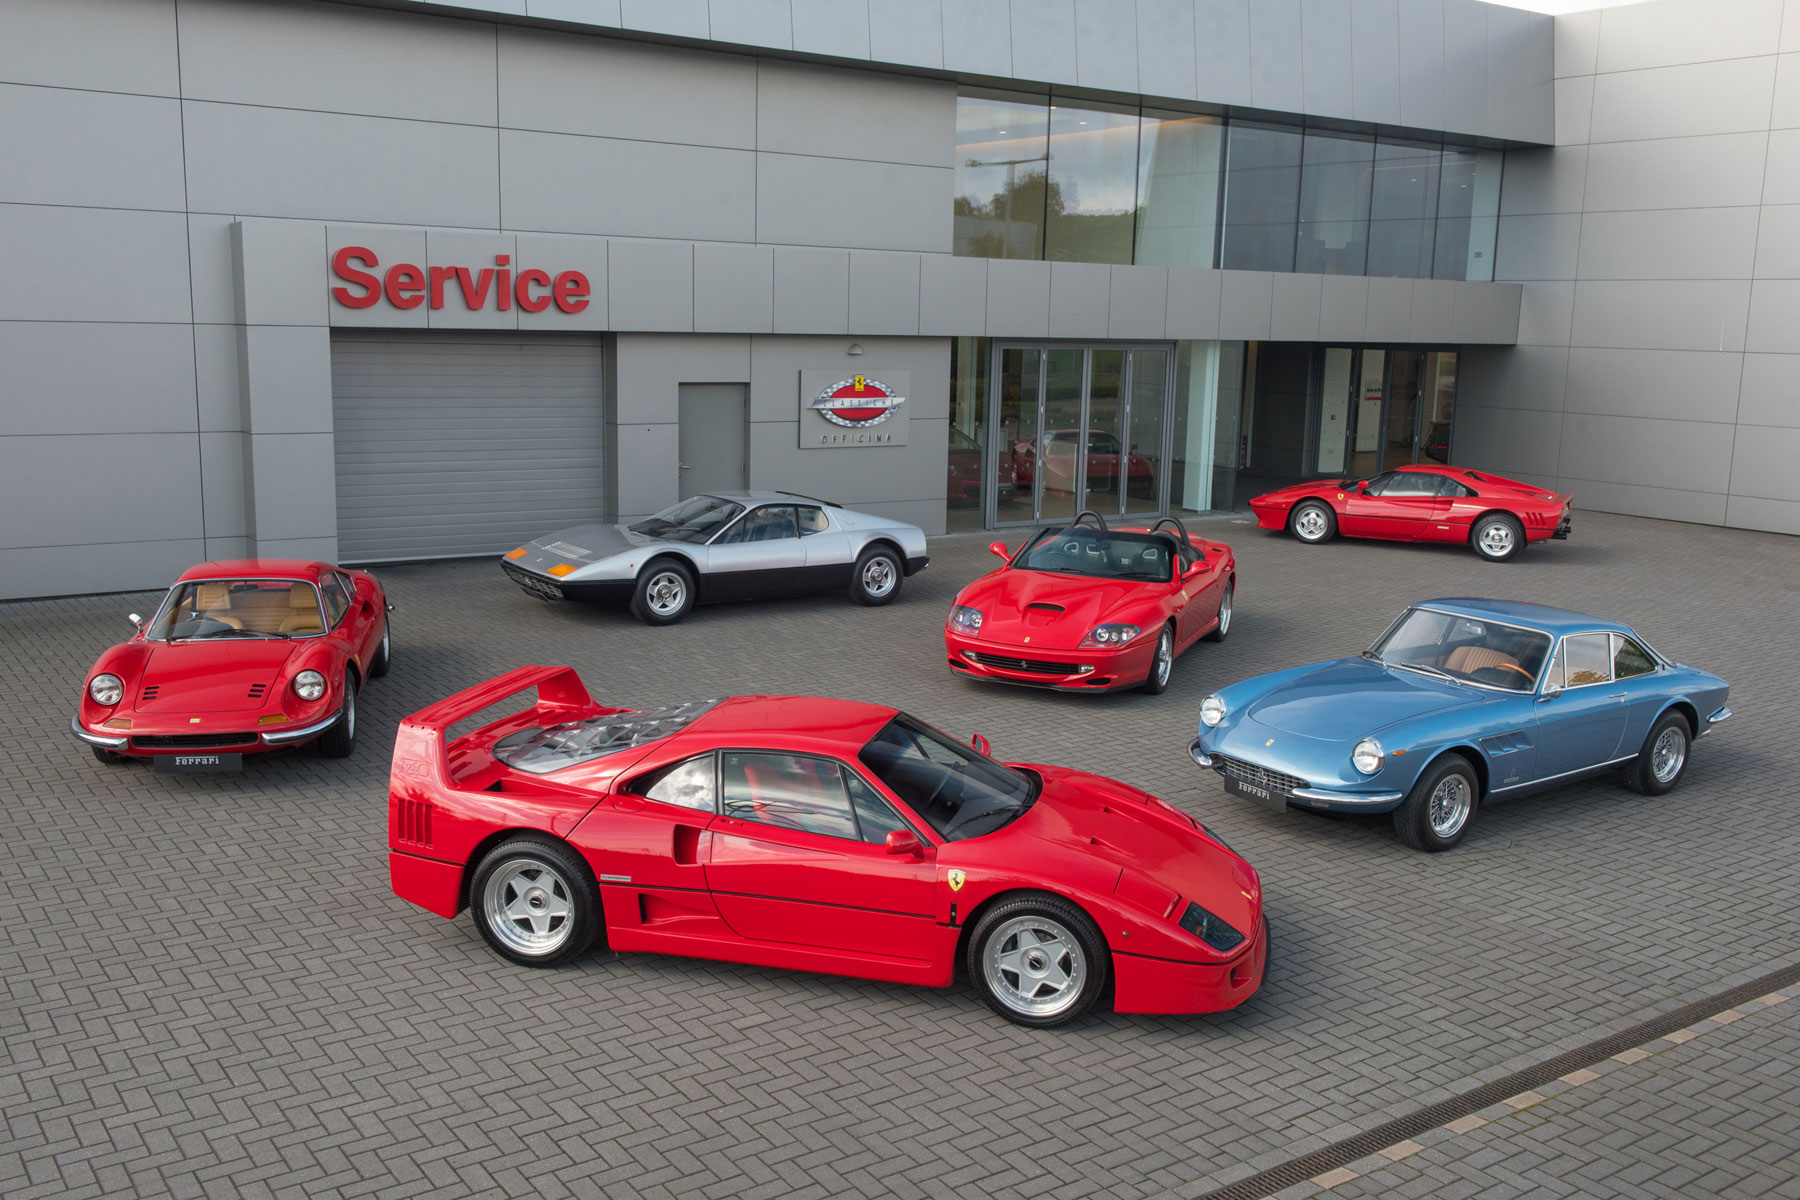 These Ferrari dealers are now authorised to work on your classic car